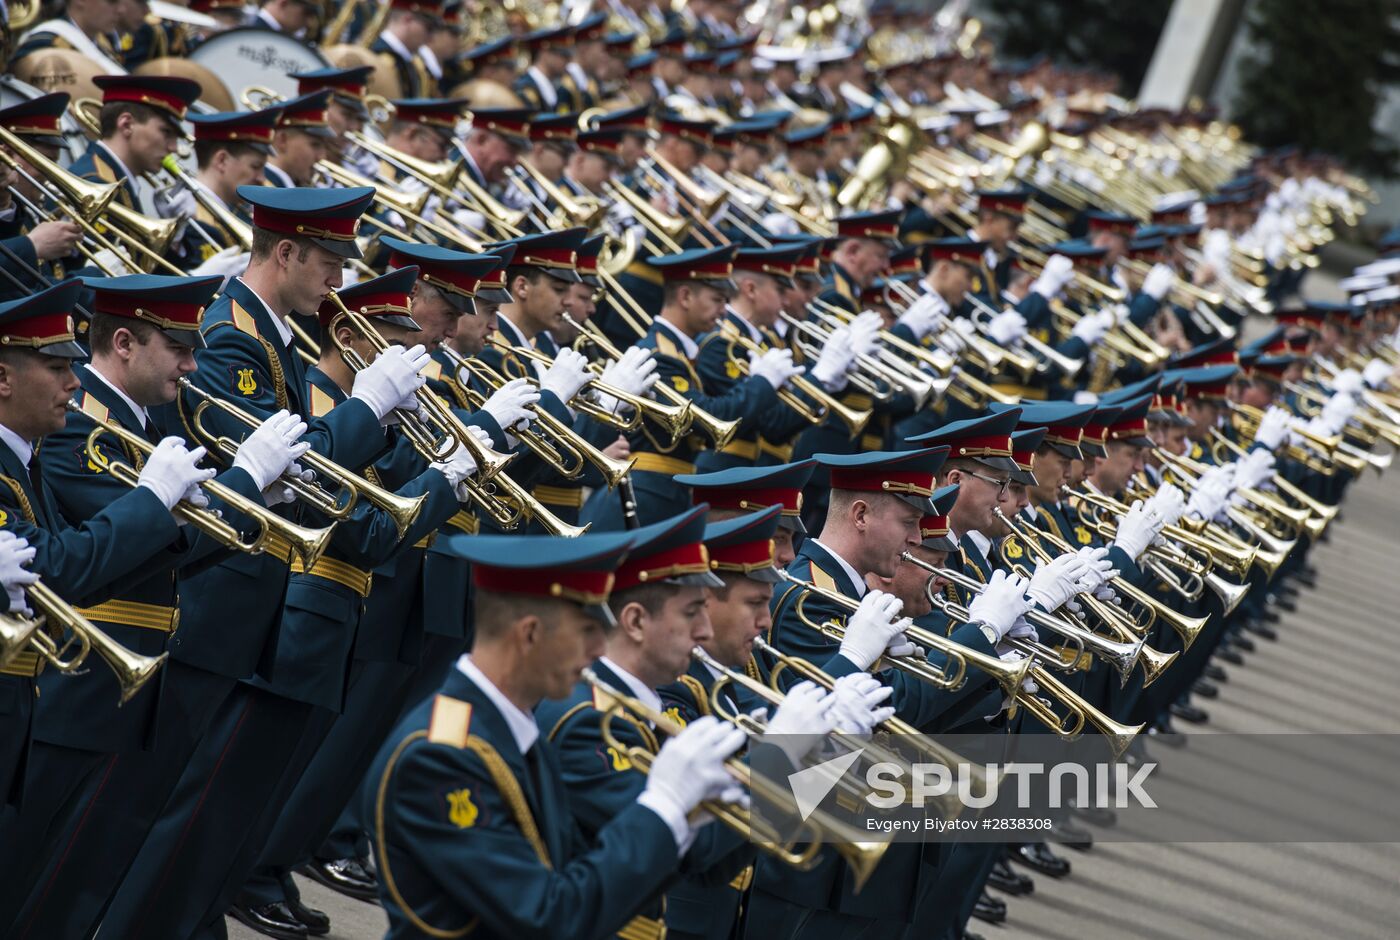 Moscow Garrison Orchestra trial show ahead of military parade